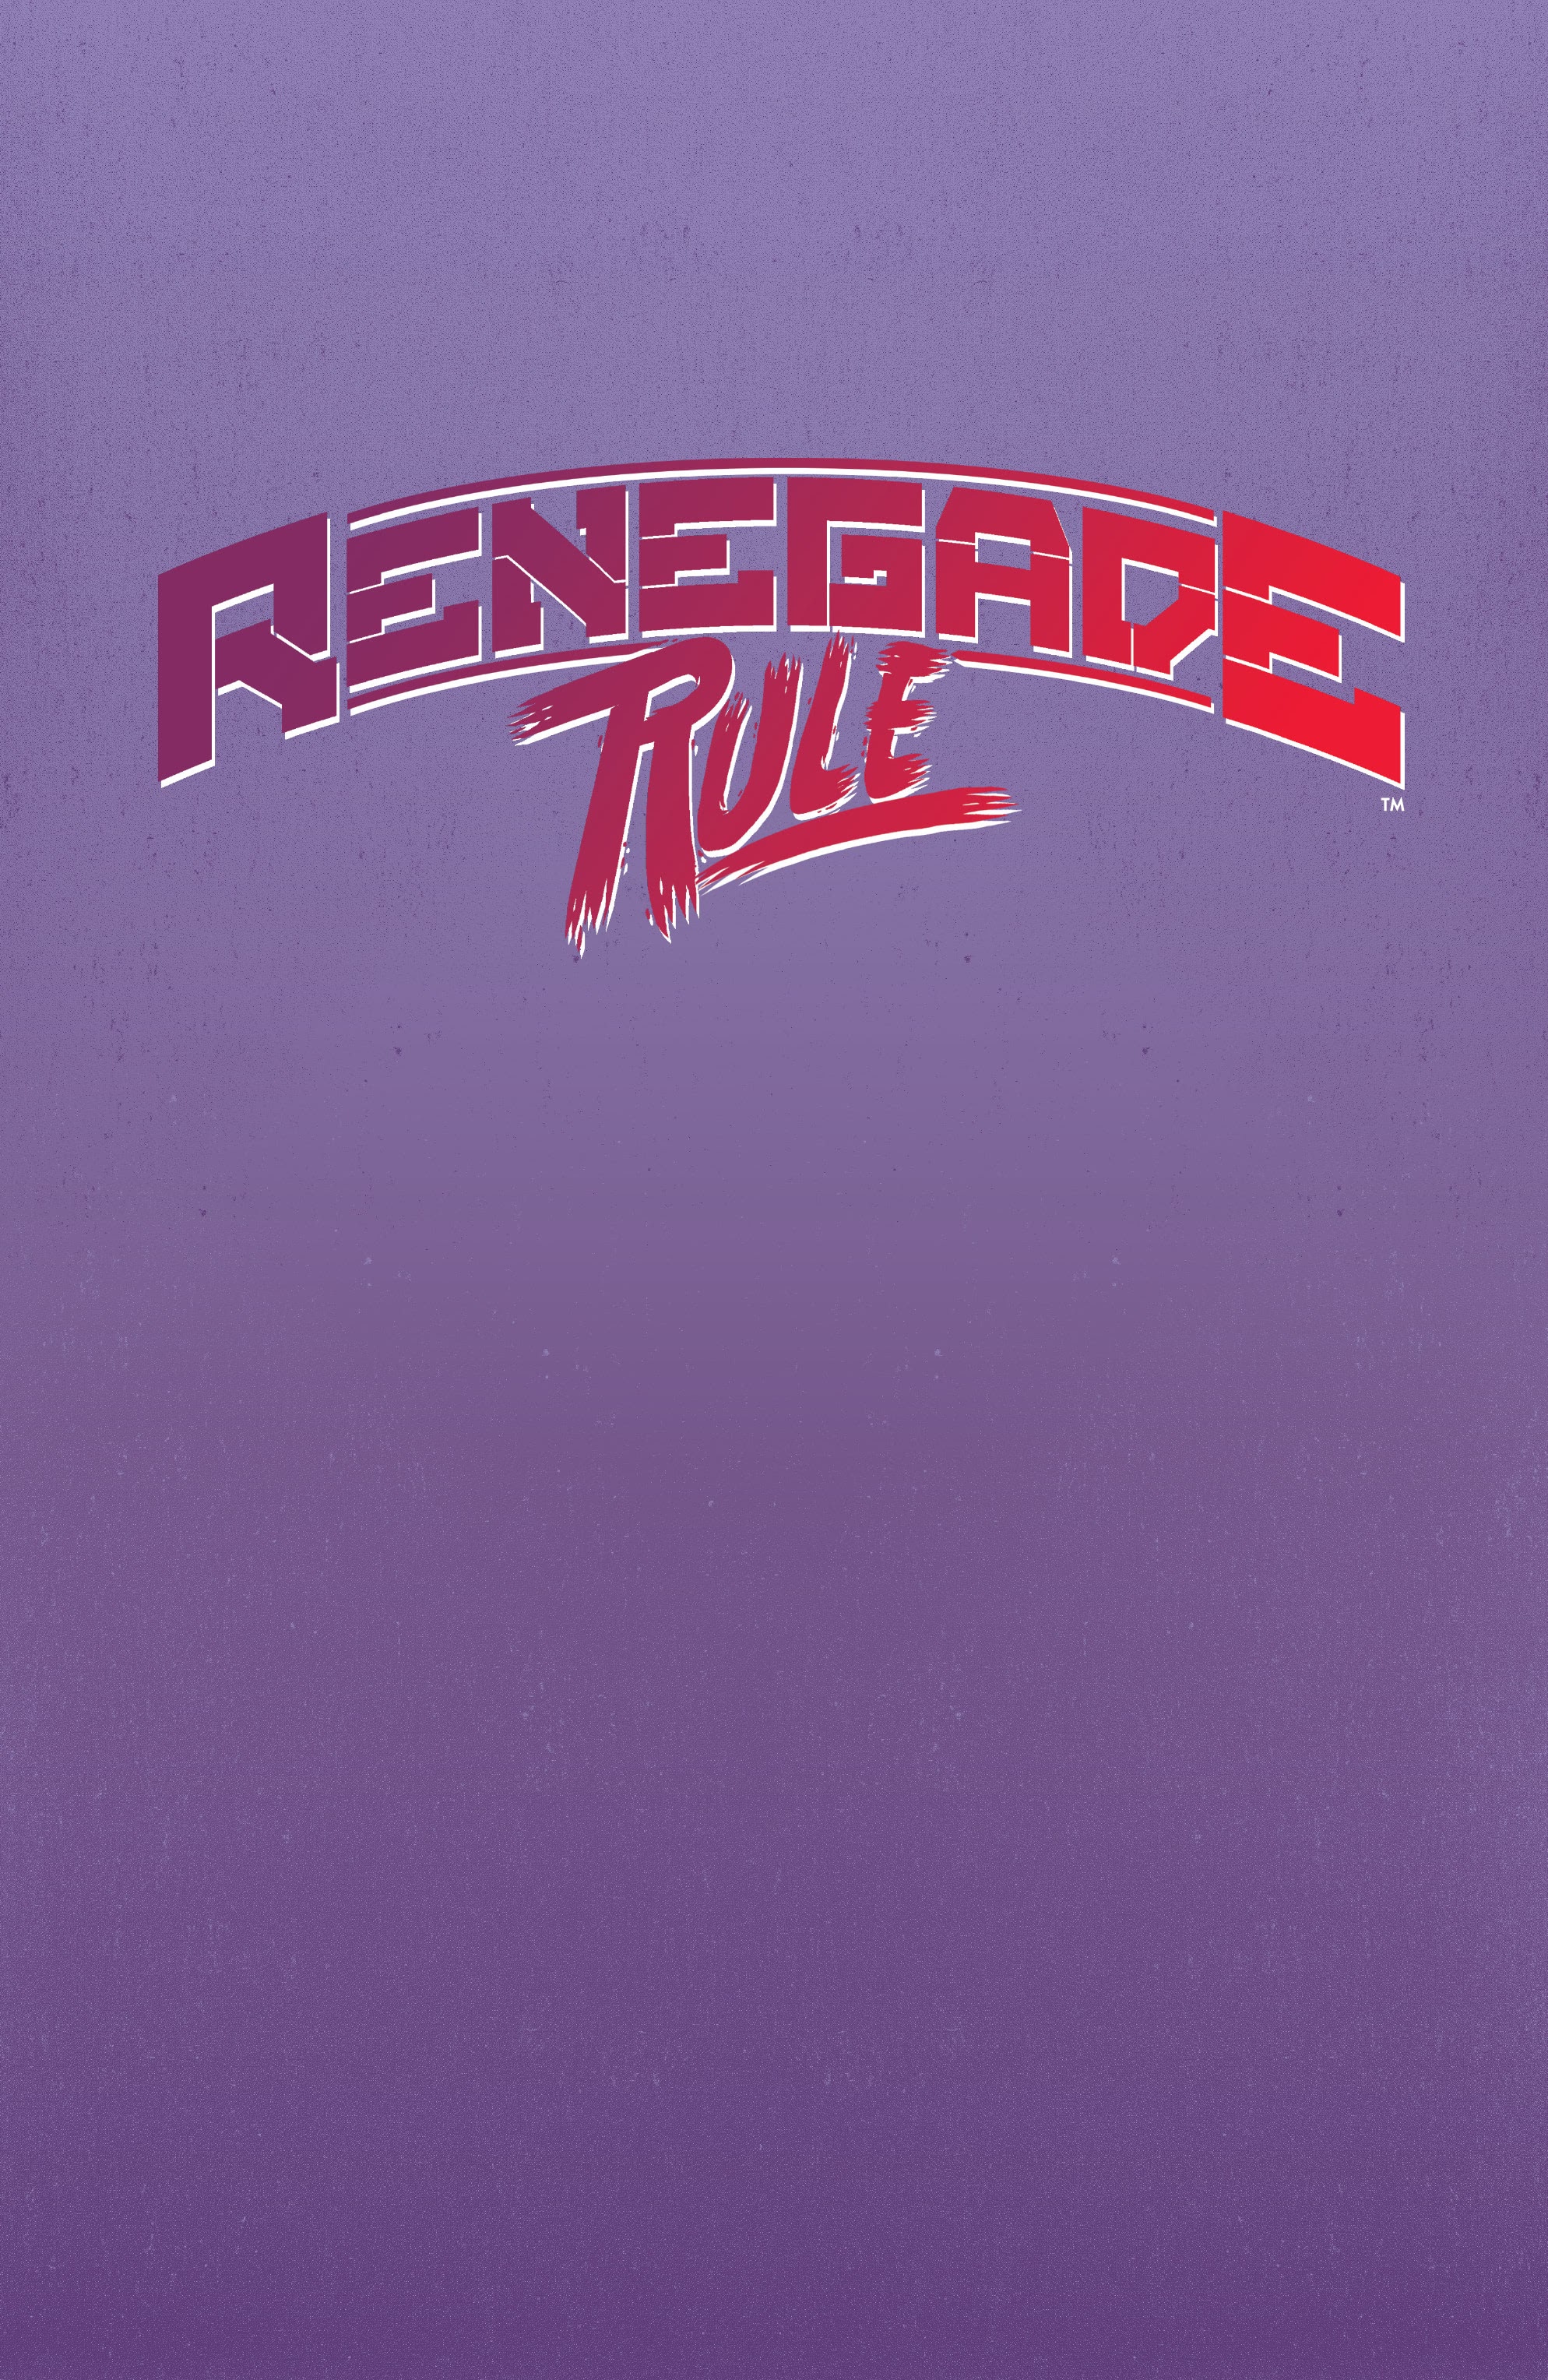 Read online Renegade Rule comic -  Issue # TPB - 2